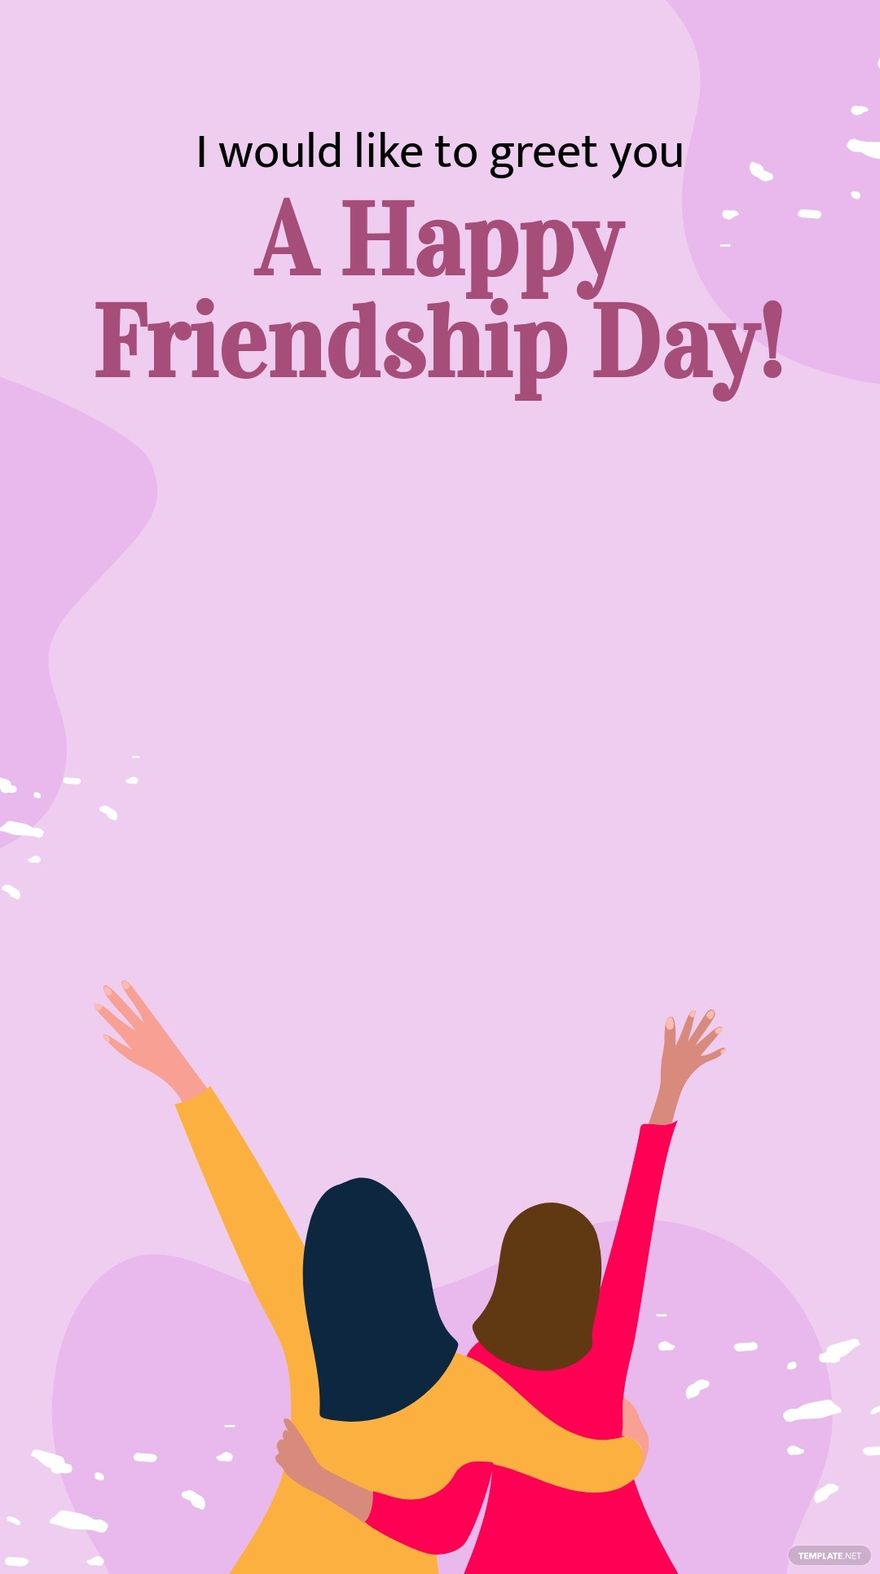 Friendship Day Templates - Images, Background, Free, Download 